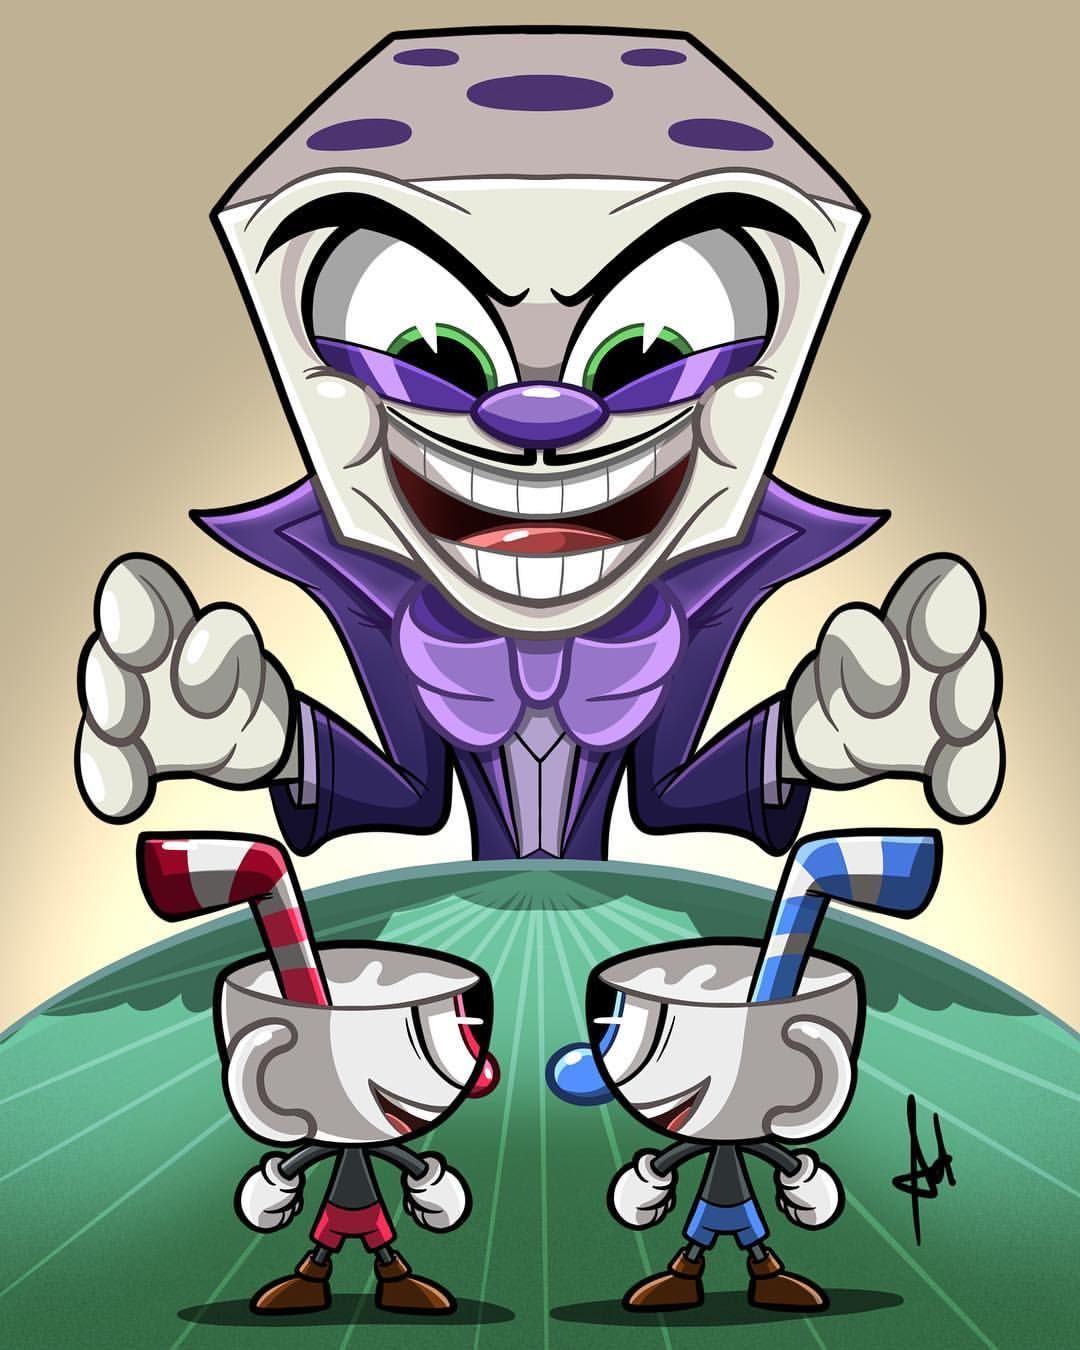 Adrian Pontoh on Instagram: “King dice. Check out Full Time lapse on IGTV. Thank you #kingdice #cuphead #drawing. Cool cartoons, Character design, Mascot design